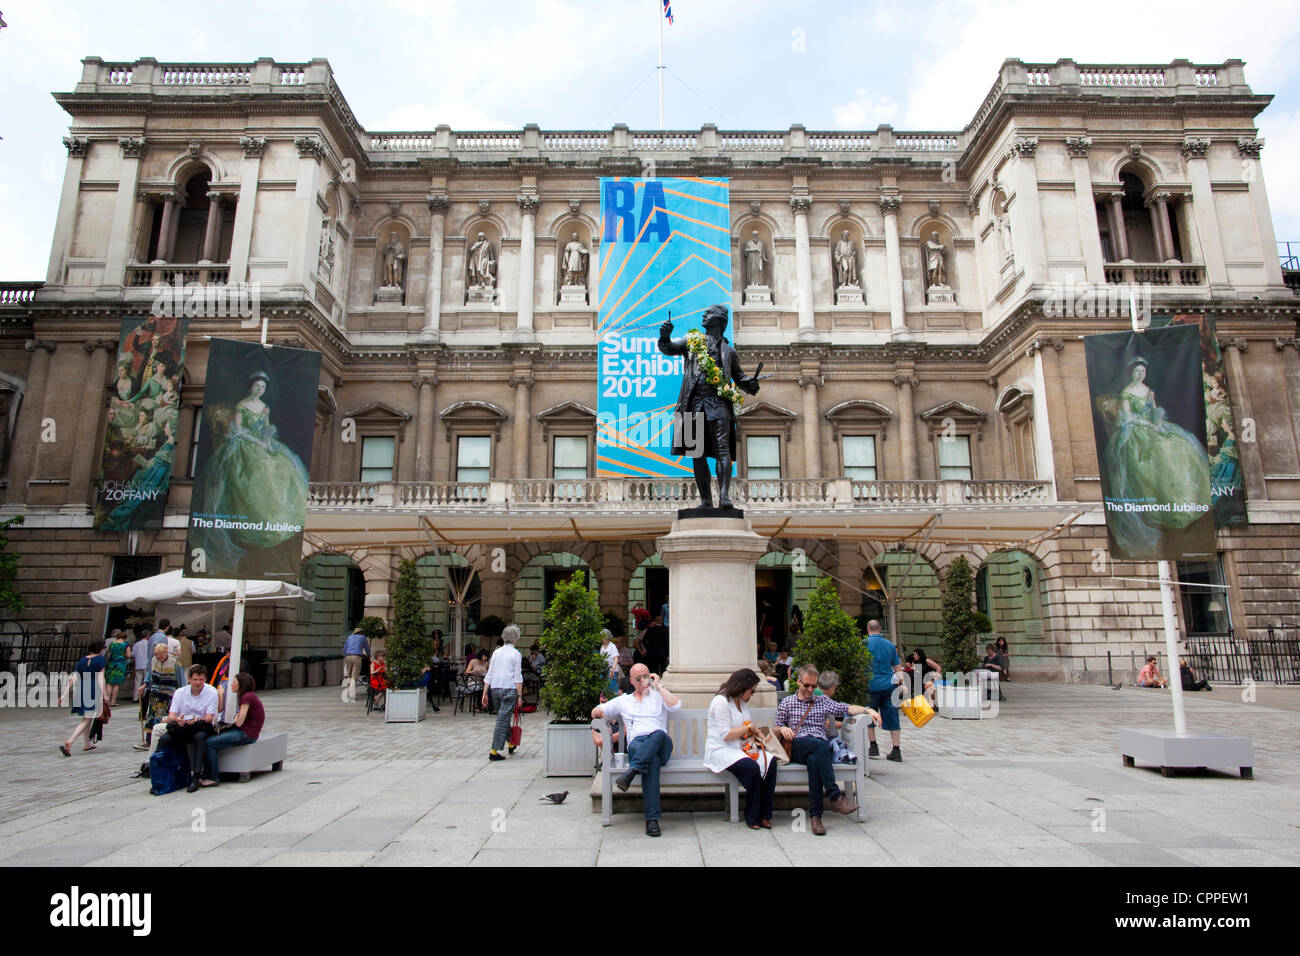 28/05/2012 .Royal Academy of Arts Summer Exhibition, London, United Kingdom. Image shows the Royal Academy of Arts Summer Exhibition 2012, Central London, United Kingdom. Stock Photo